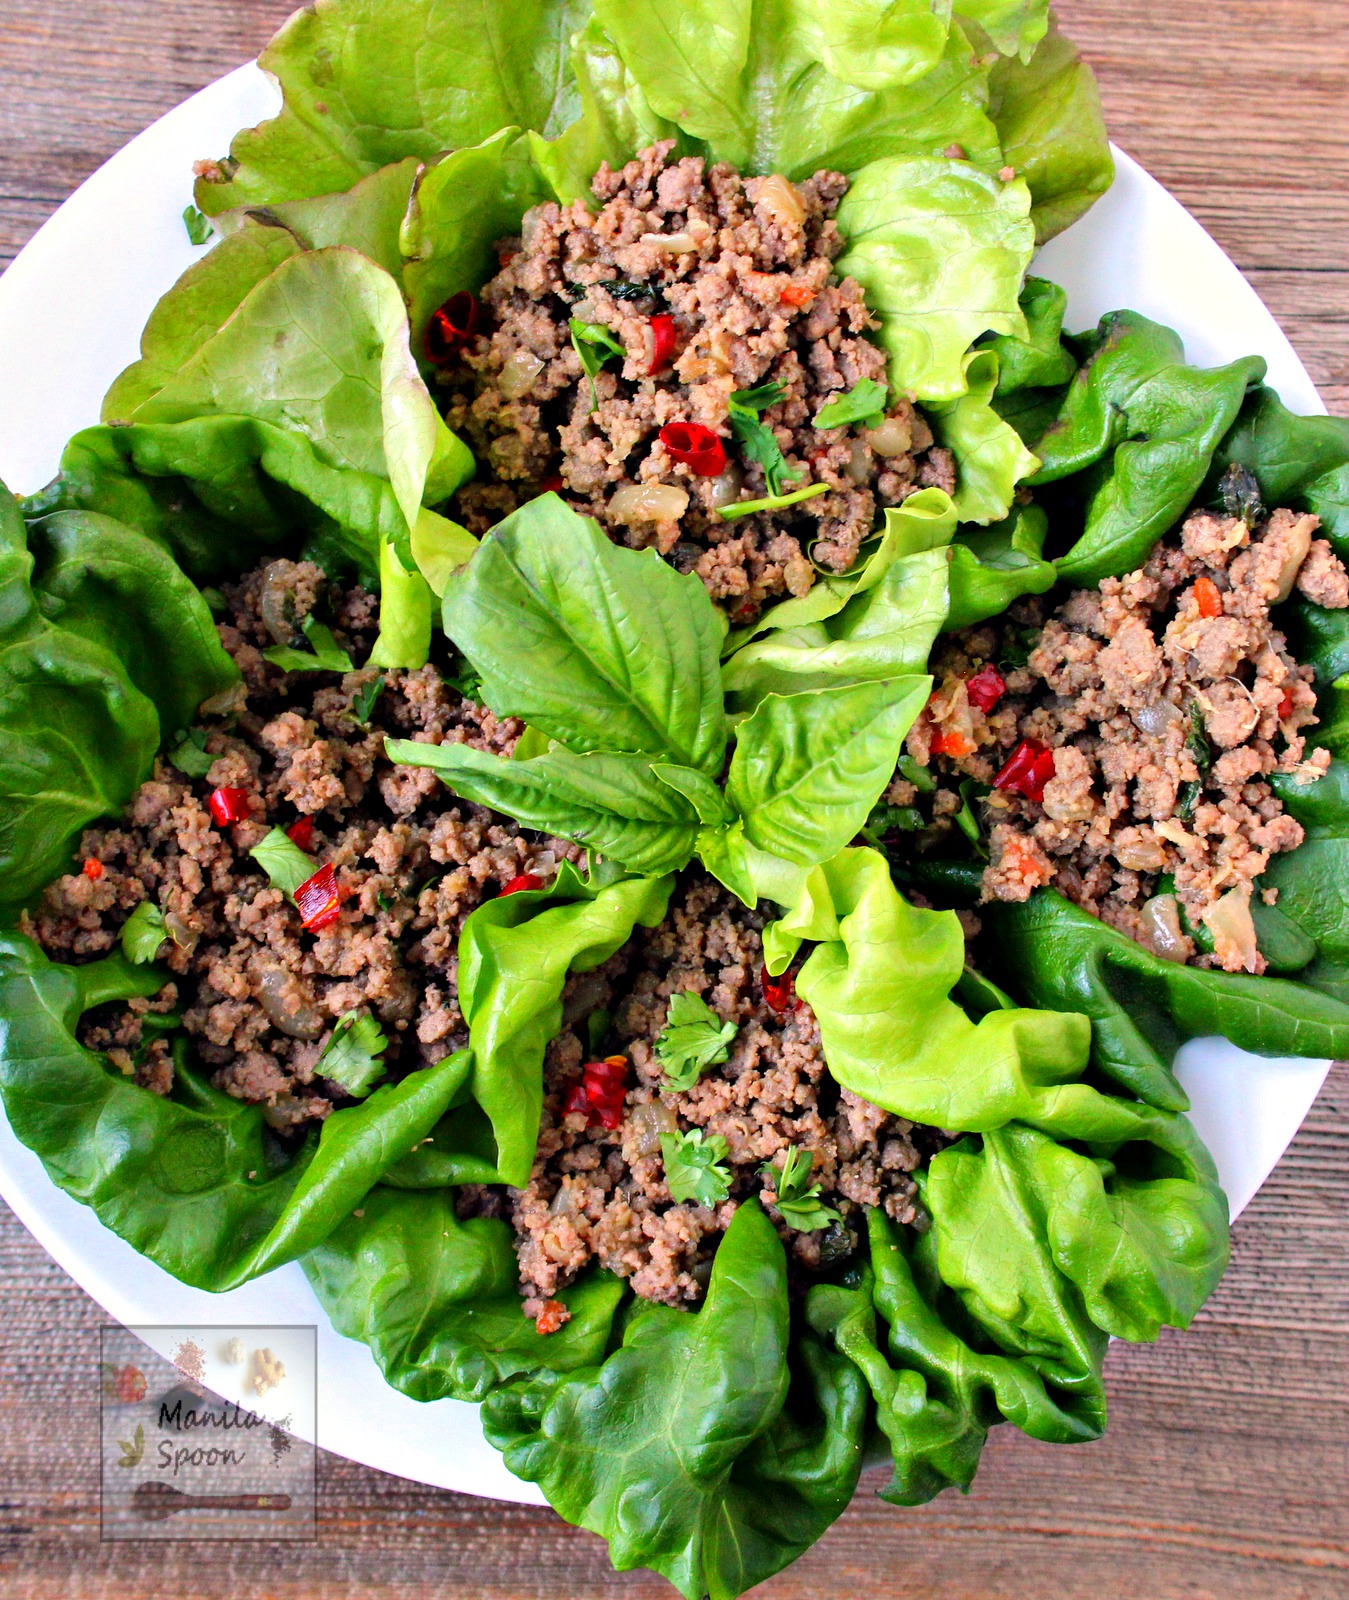 Very tasty, quick and simple to make is this Thai inspired Asian Beef Lettuce Wraps. Perfect as appetizer or as main dish served with Jasmine rice. Gluten-free and paleo-friendly, too. | manilaspoon.com